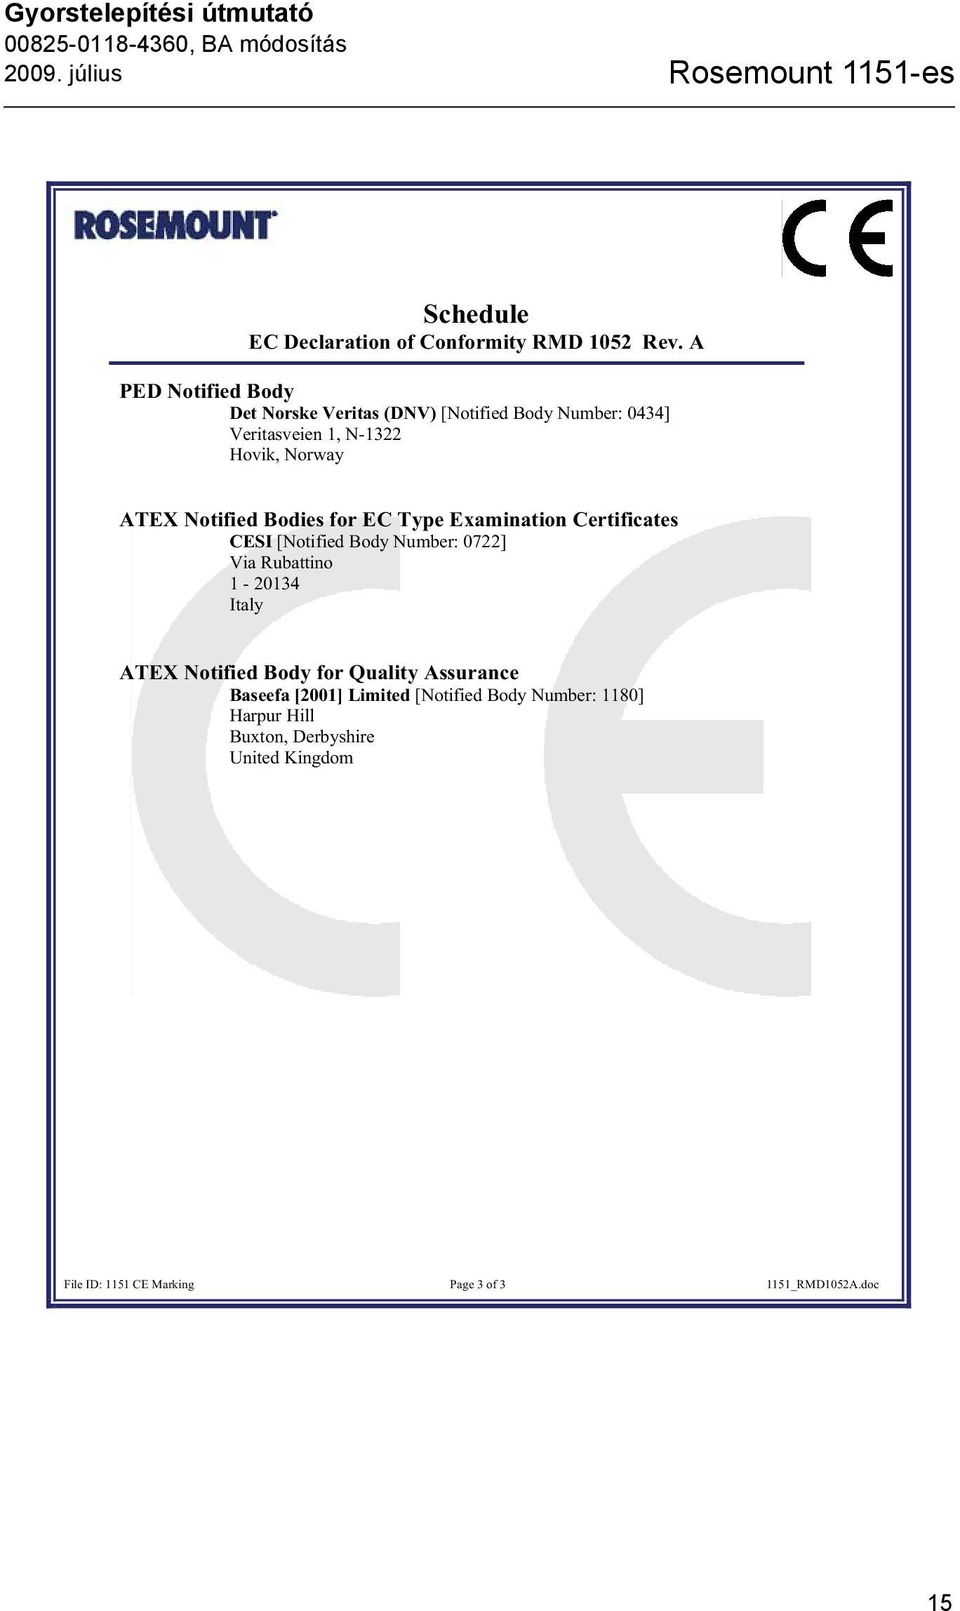 for EC Type Examination Certificates CESI [Notified Body Number: 0722] Via Rubattino 1-20134 Italy ATEX Notified Body for Quality